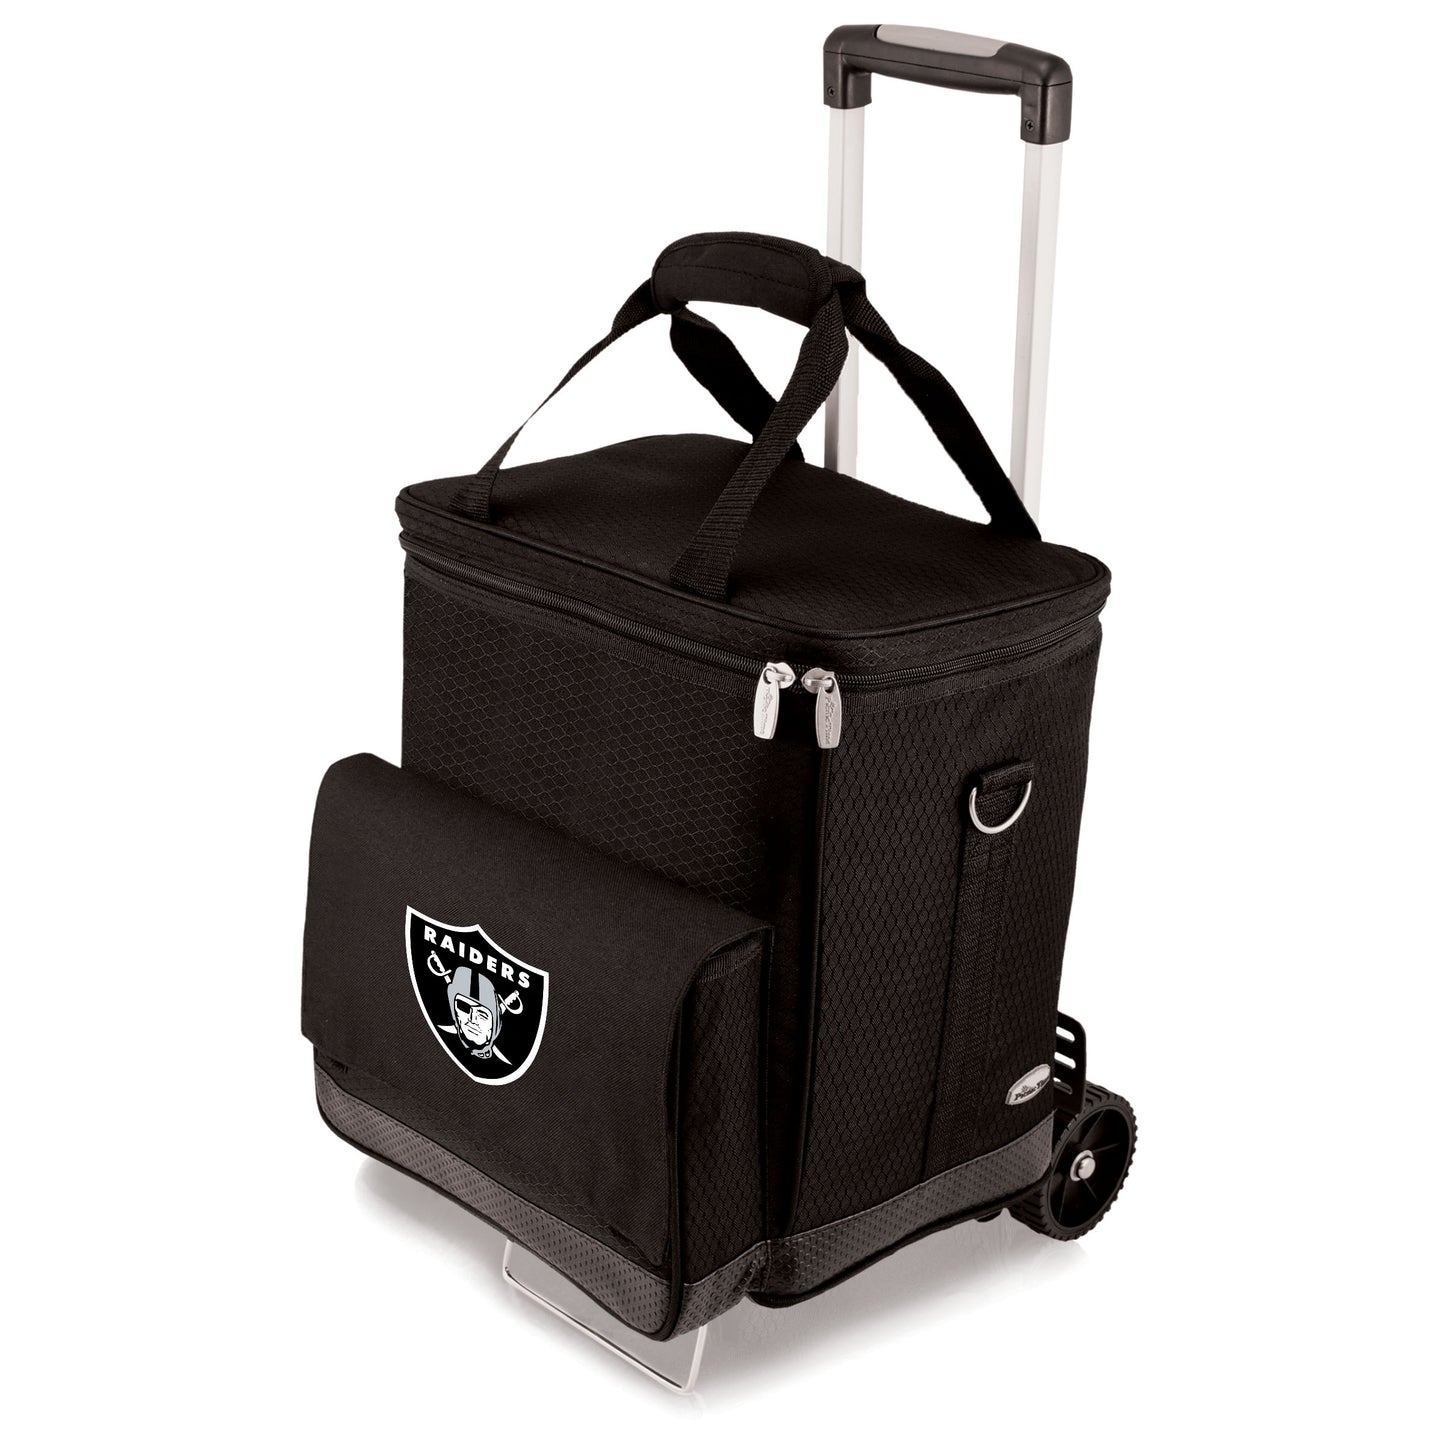 Las Vegas Raiders Cellar 6-Bottle Wine Carrier & Cooler Tote with Trolley, (Black with Gray Accents)